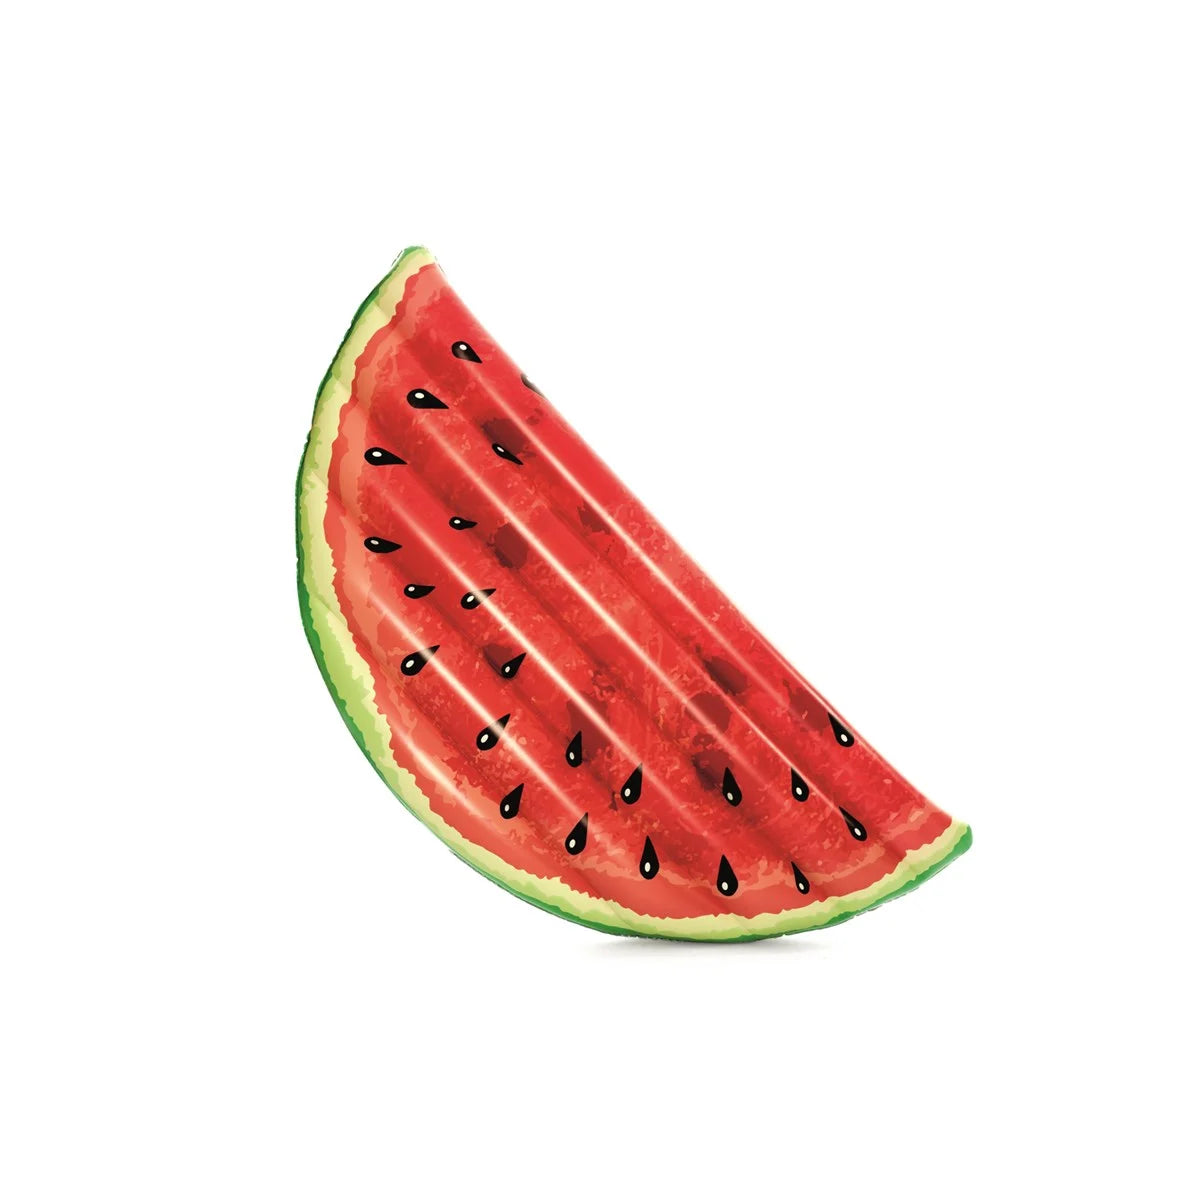 Watermelon Slice Inflatable Pool Toy - H2oGo Watermelon Lounge